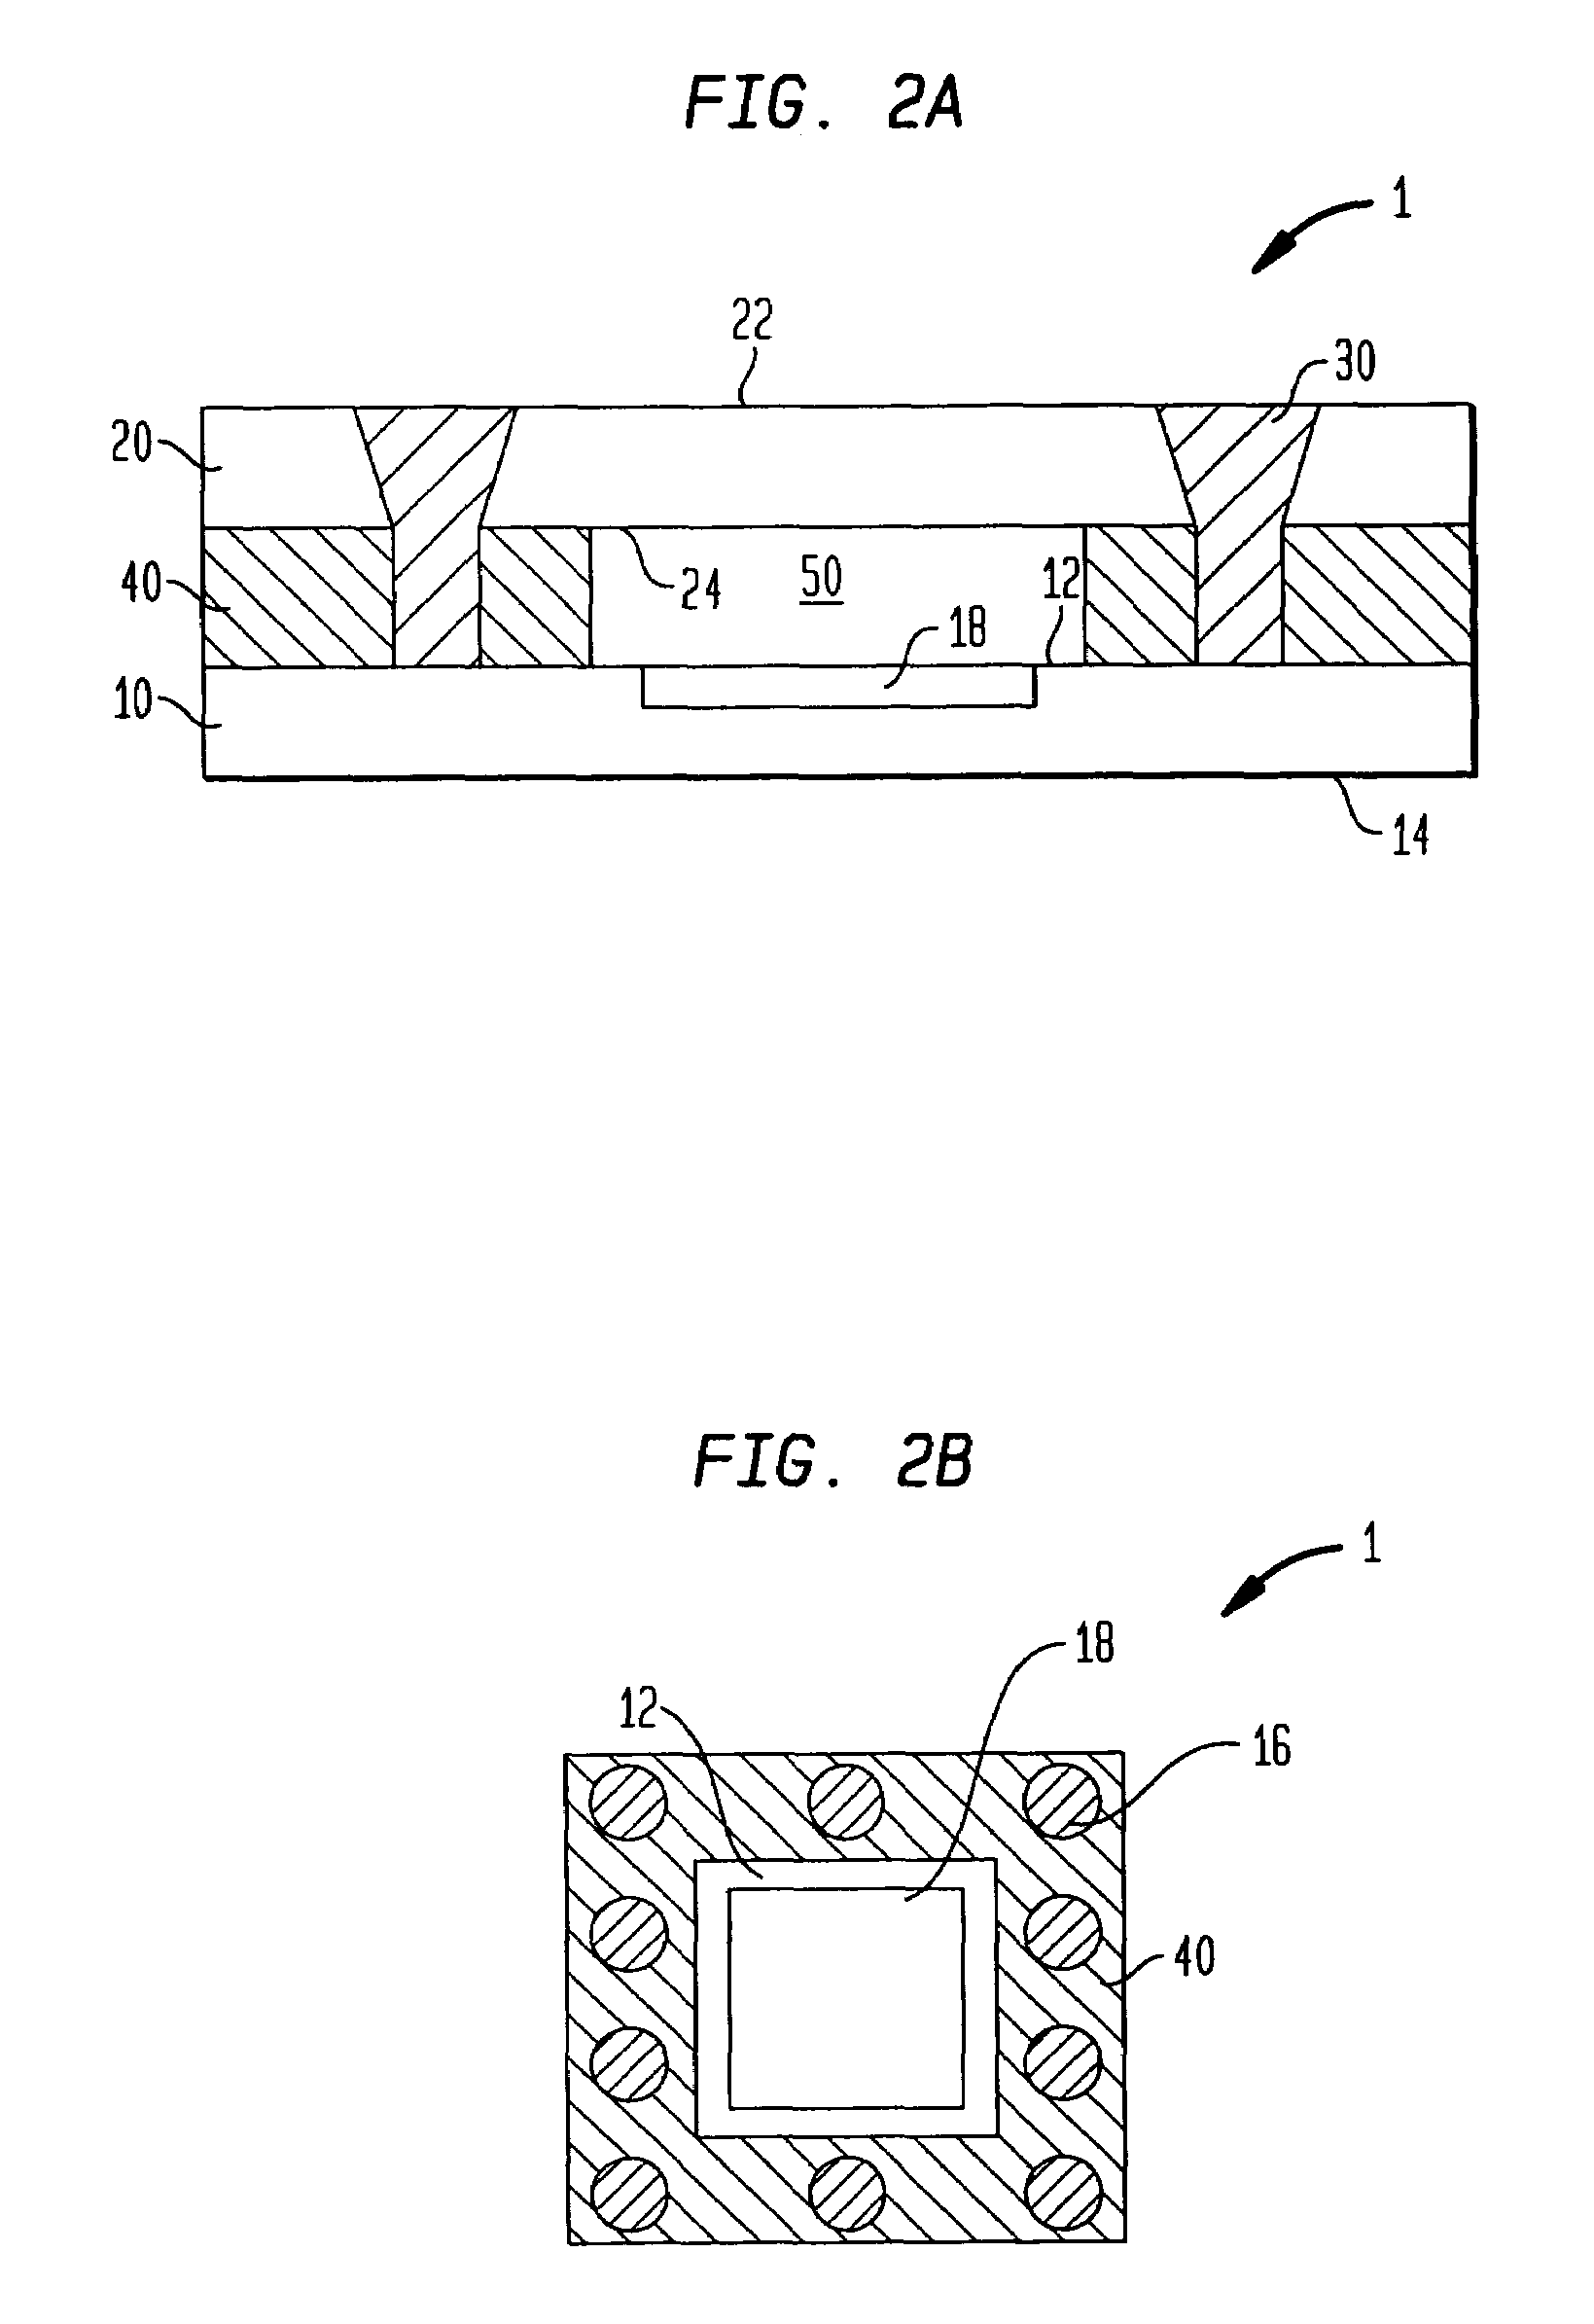 Microelectronic package optionally having differing cover and device thermal expansivities